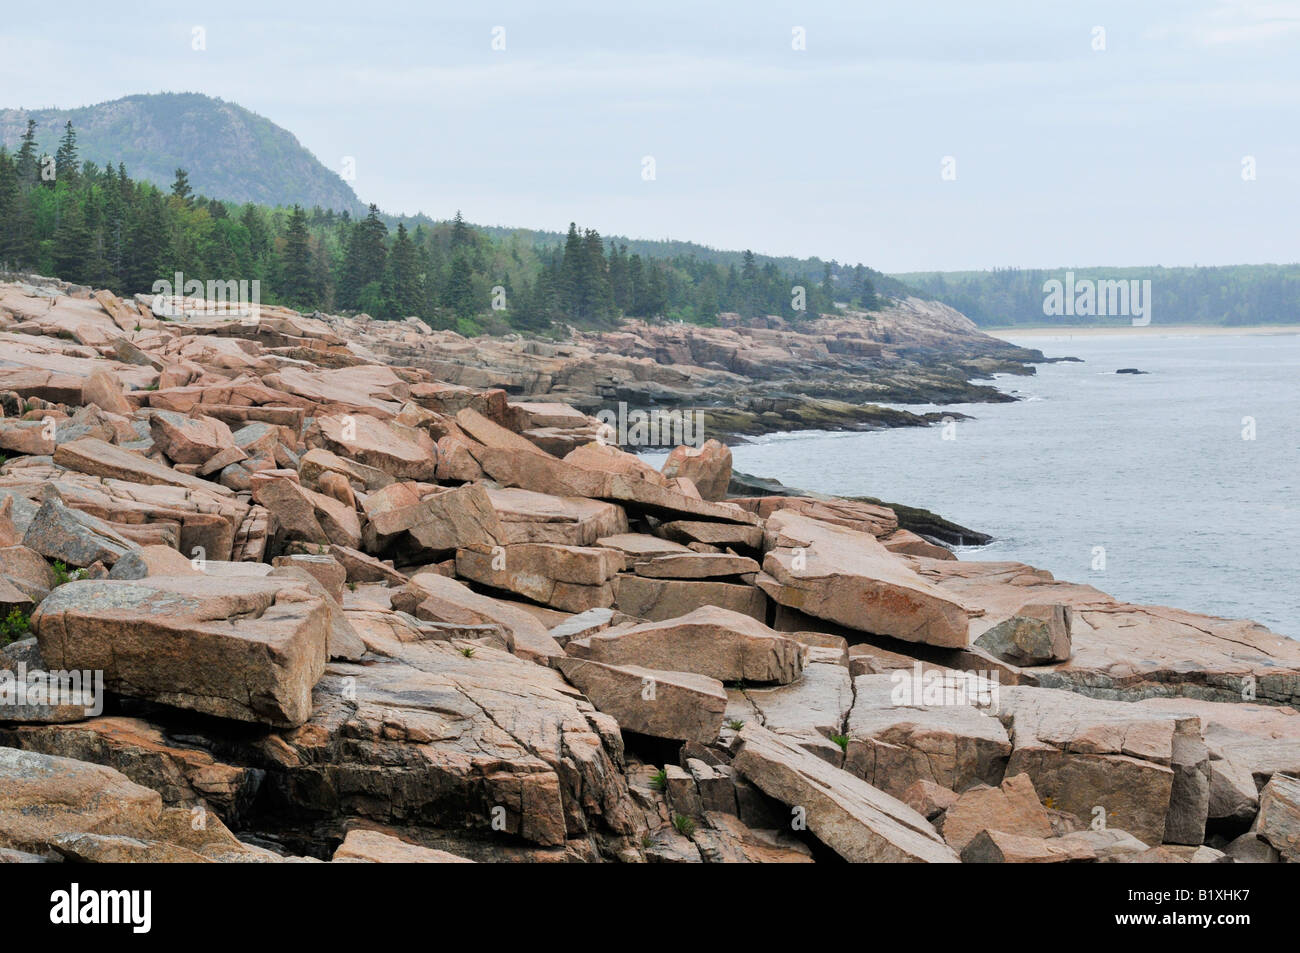 The Acadia National Park in on the coast of Maine, United States. Stock Photo